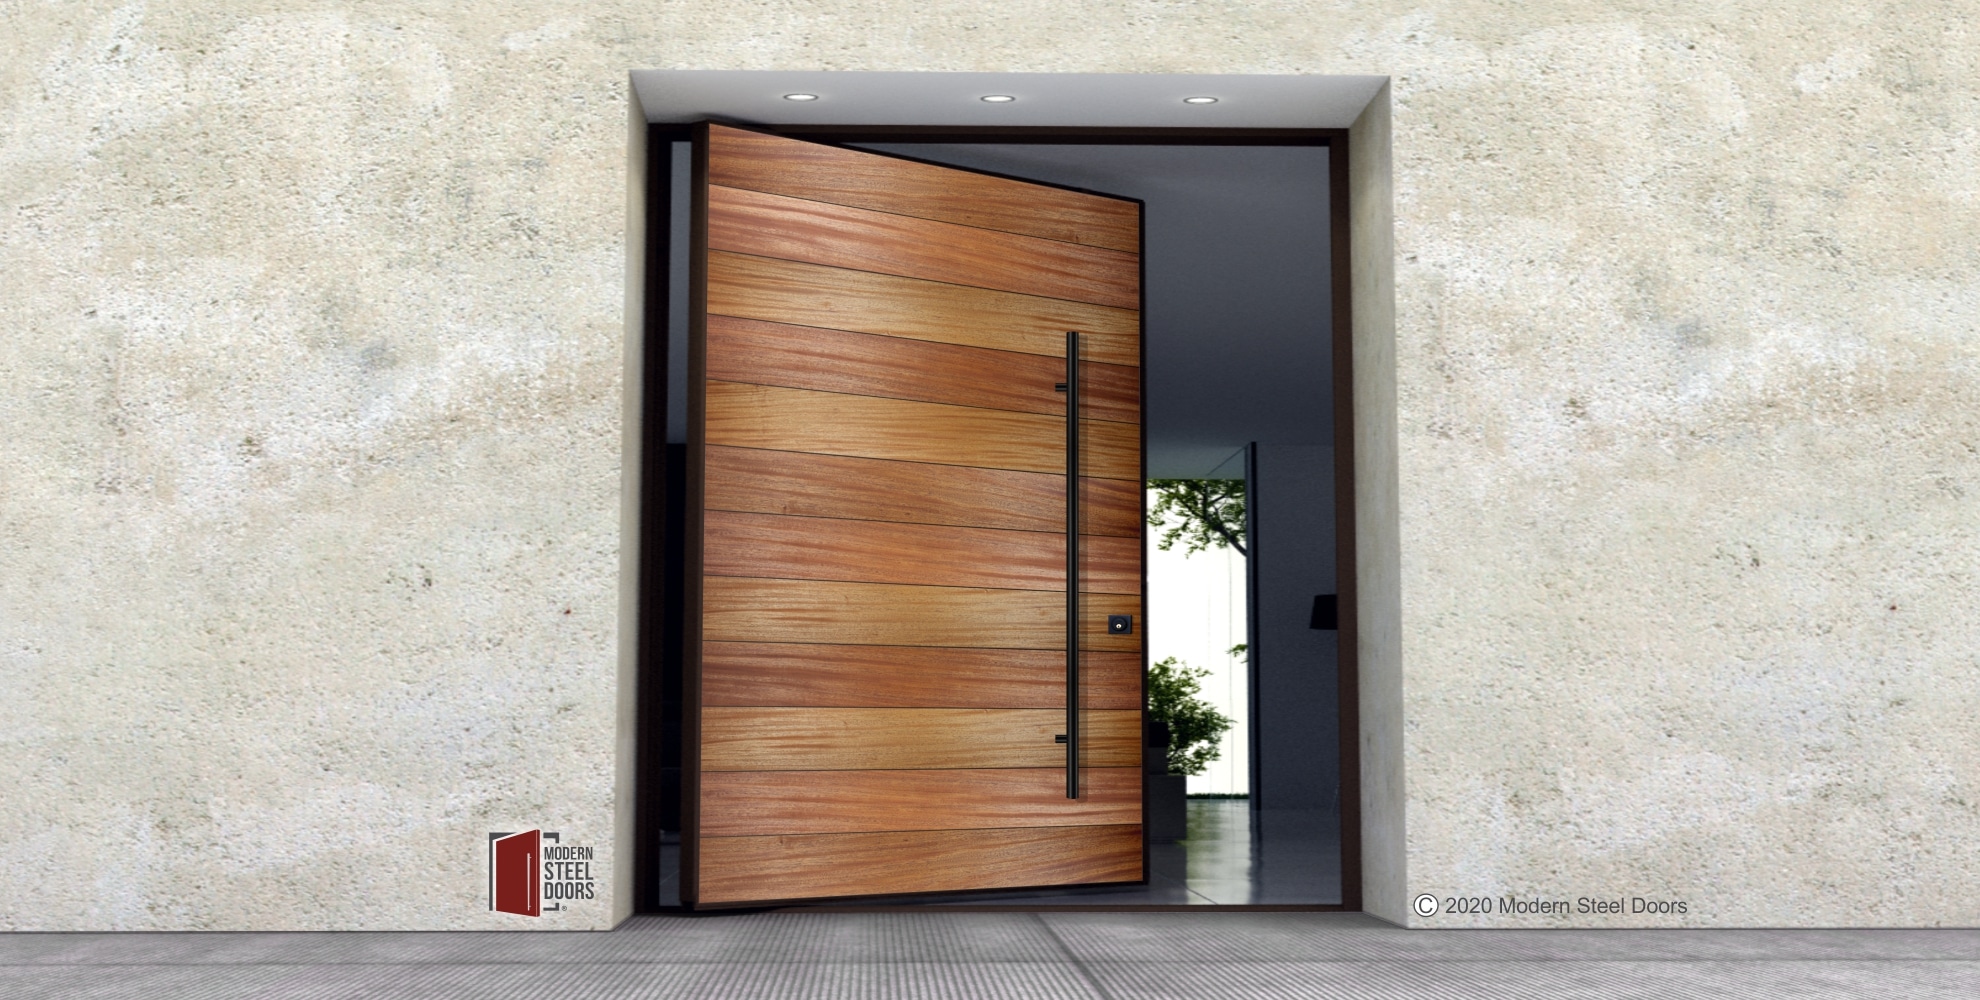 METAL ENTRY DOOR WITH WASHED TEAK WOOD SIDELIGHT AND PULL